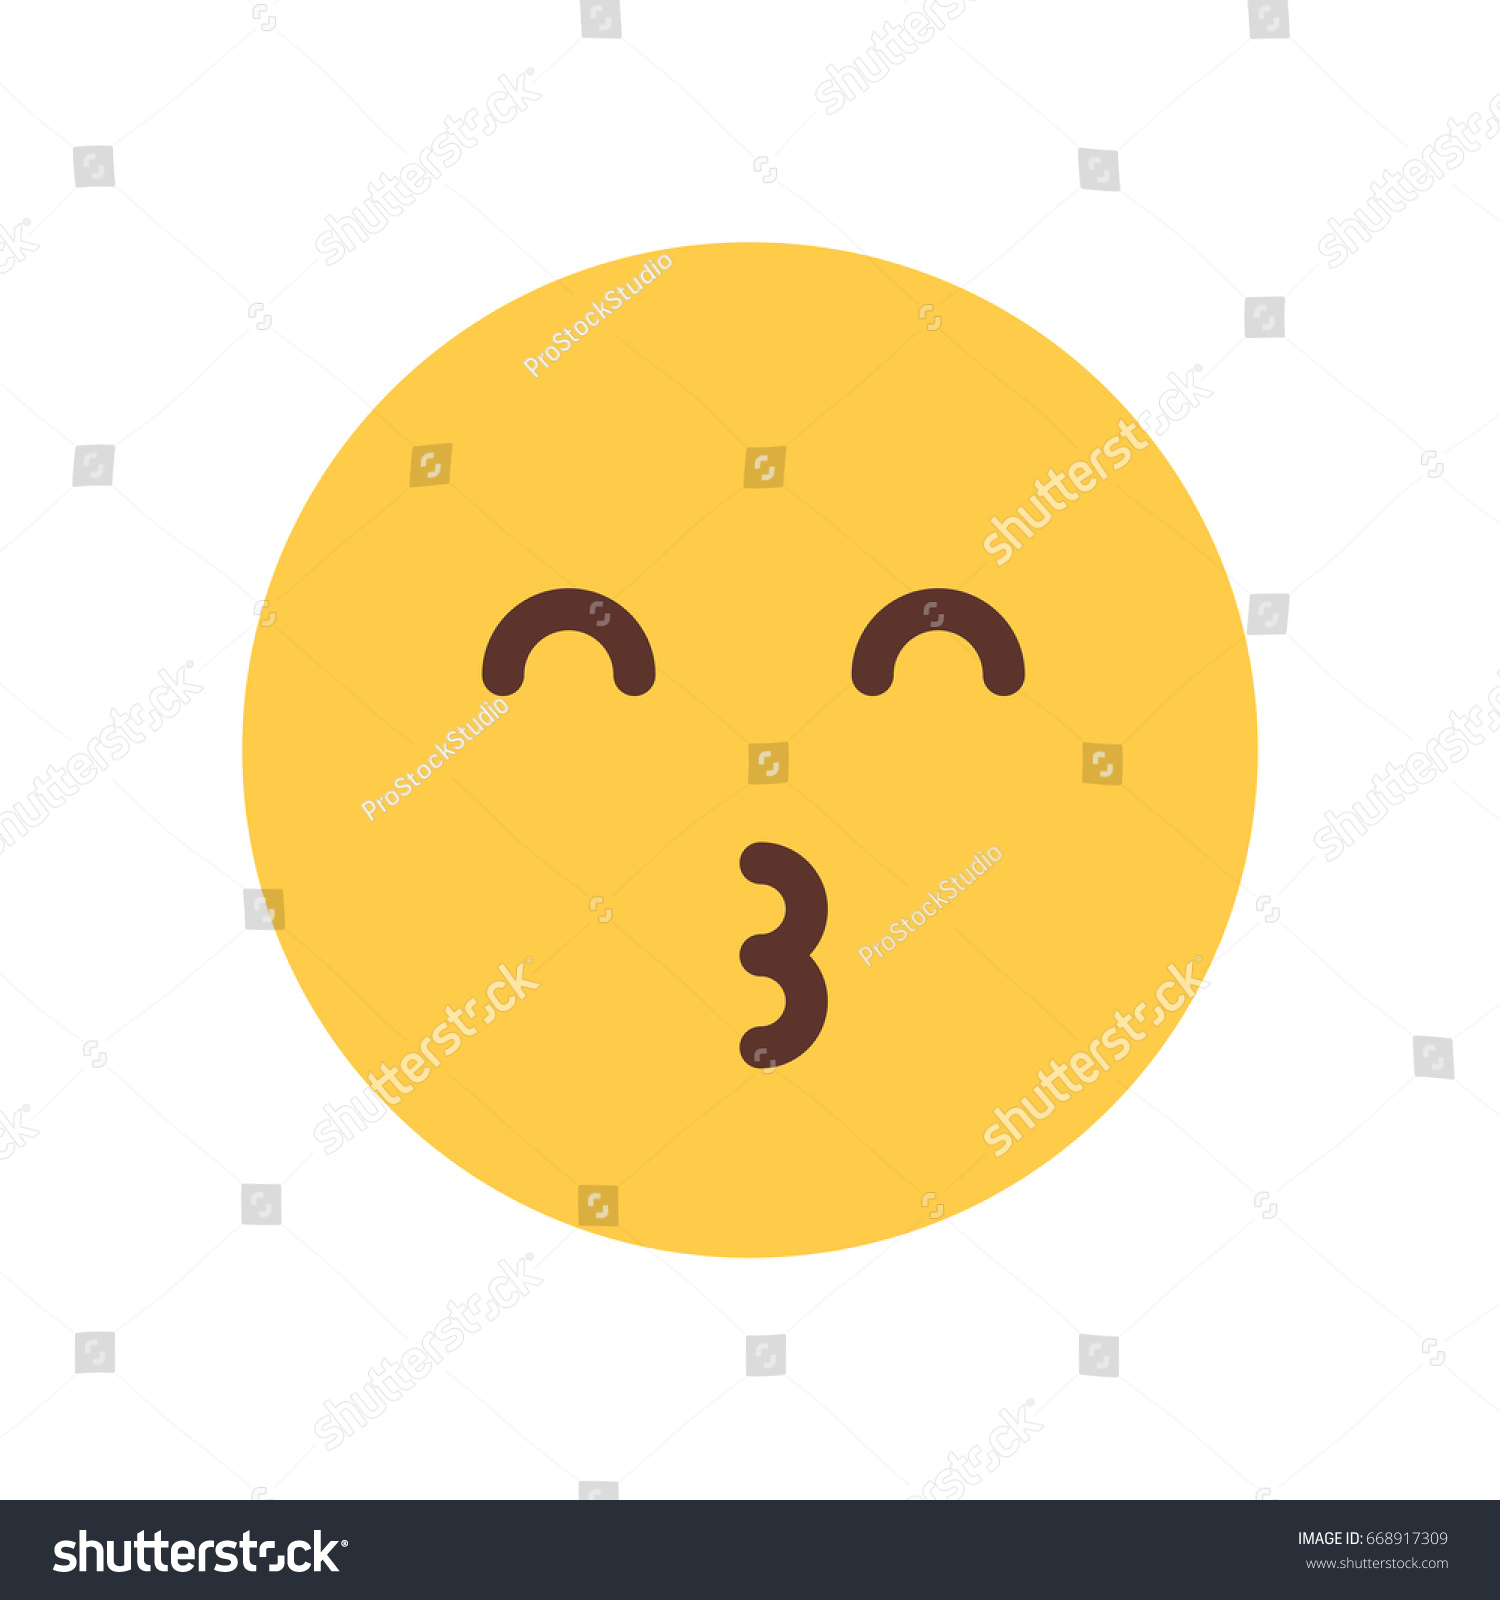 SVG of Yellow Smiling Cartoon Face Blow Kiss Emoji People Emotion Icon Flat Vector Illustration svg